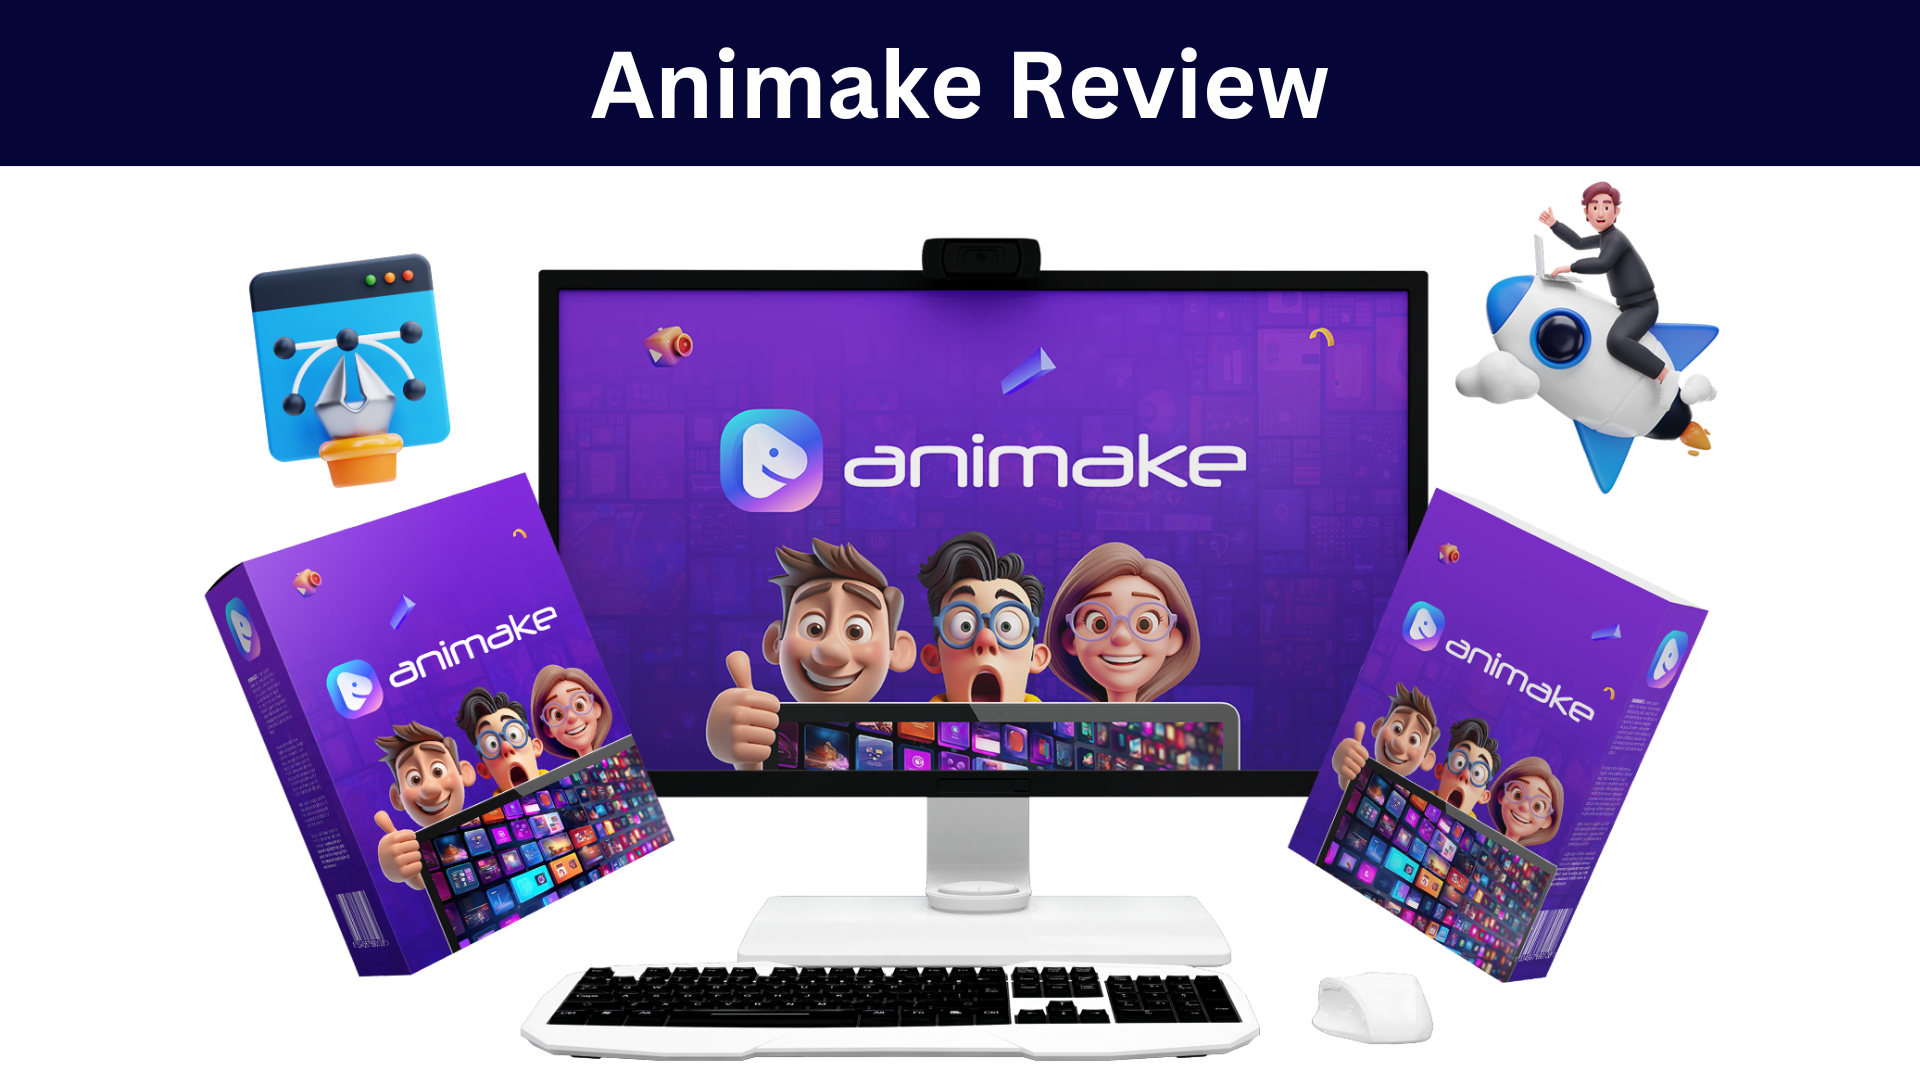 Animake Review